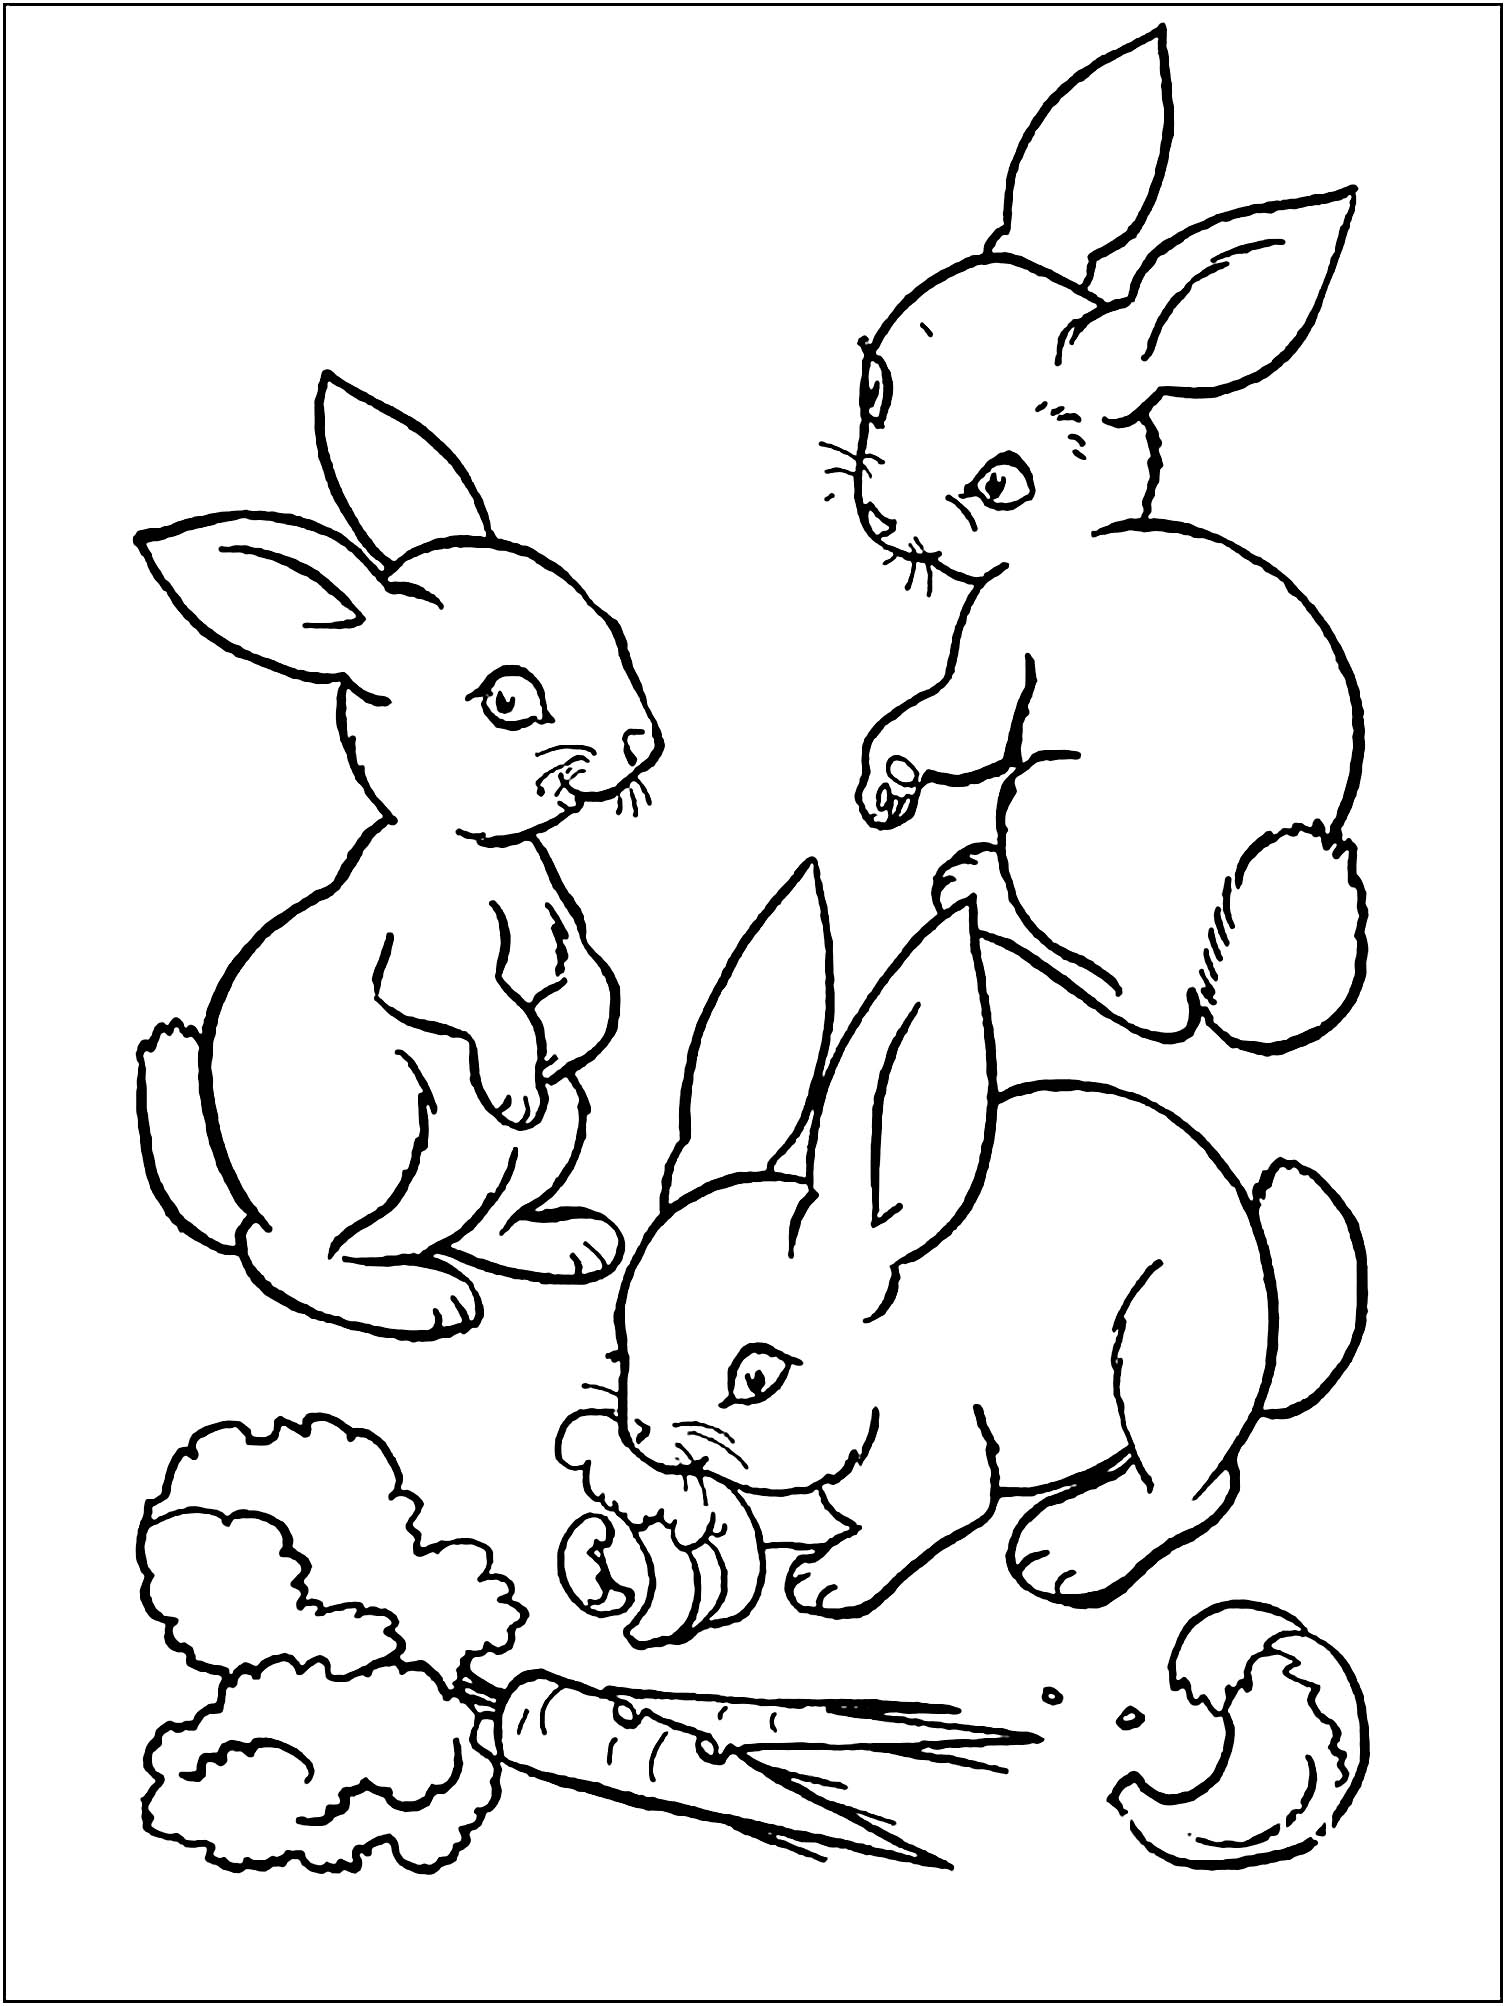 Printable bunnies coloring pages for kids - Rabbits & Bunnies Kids ...